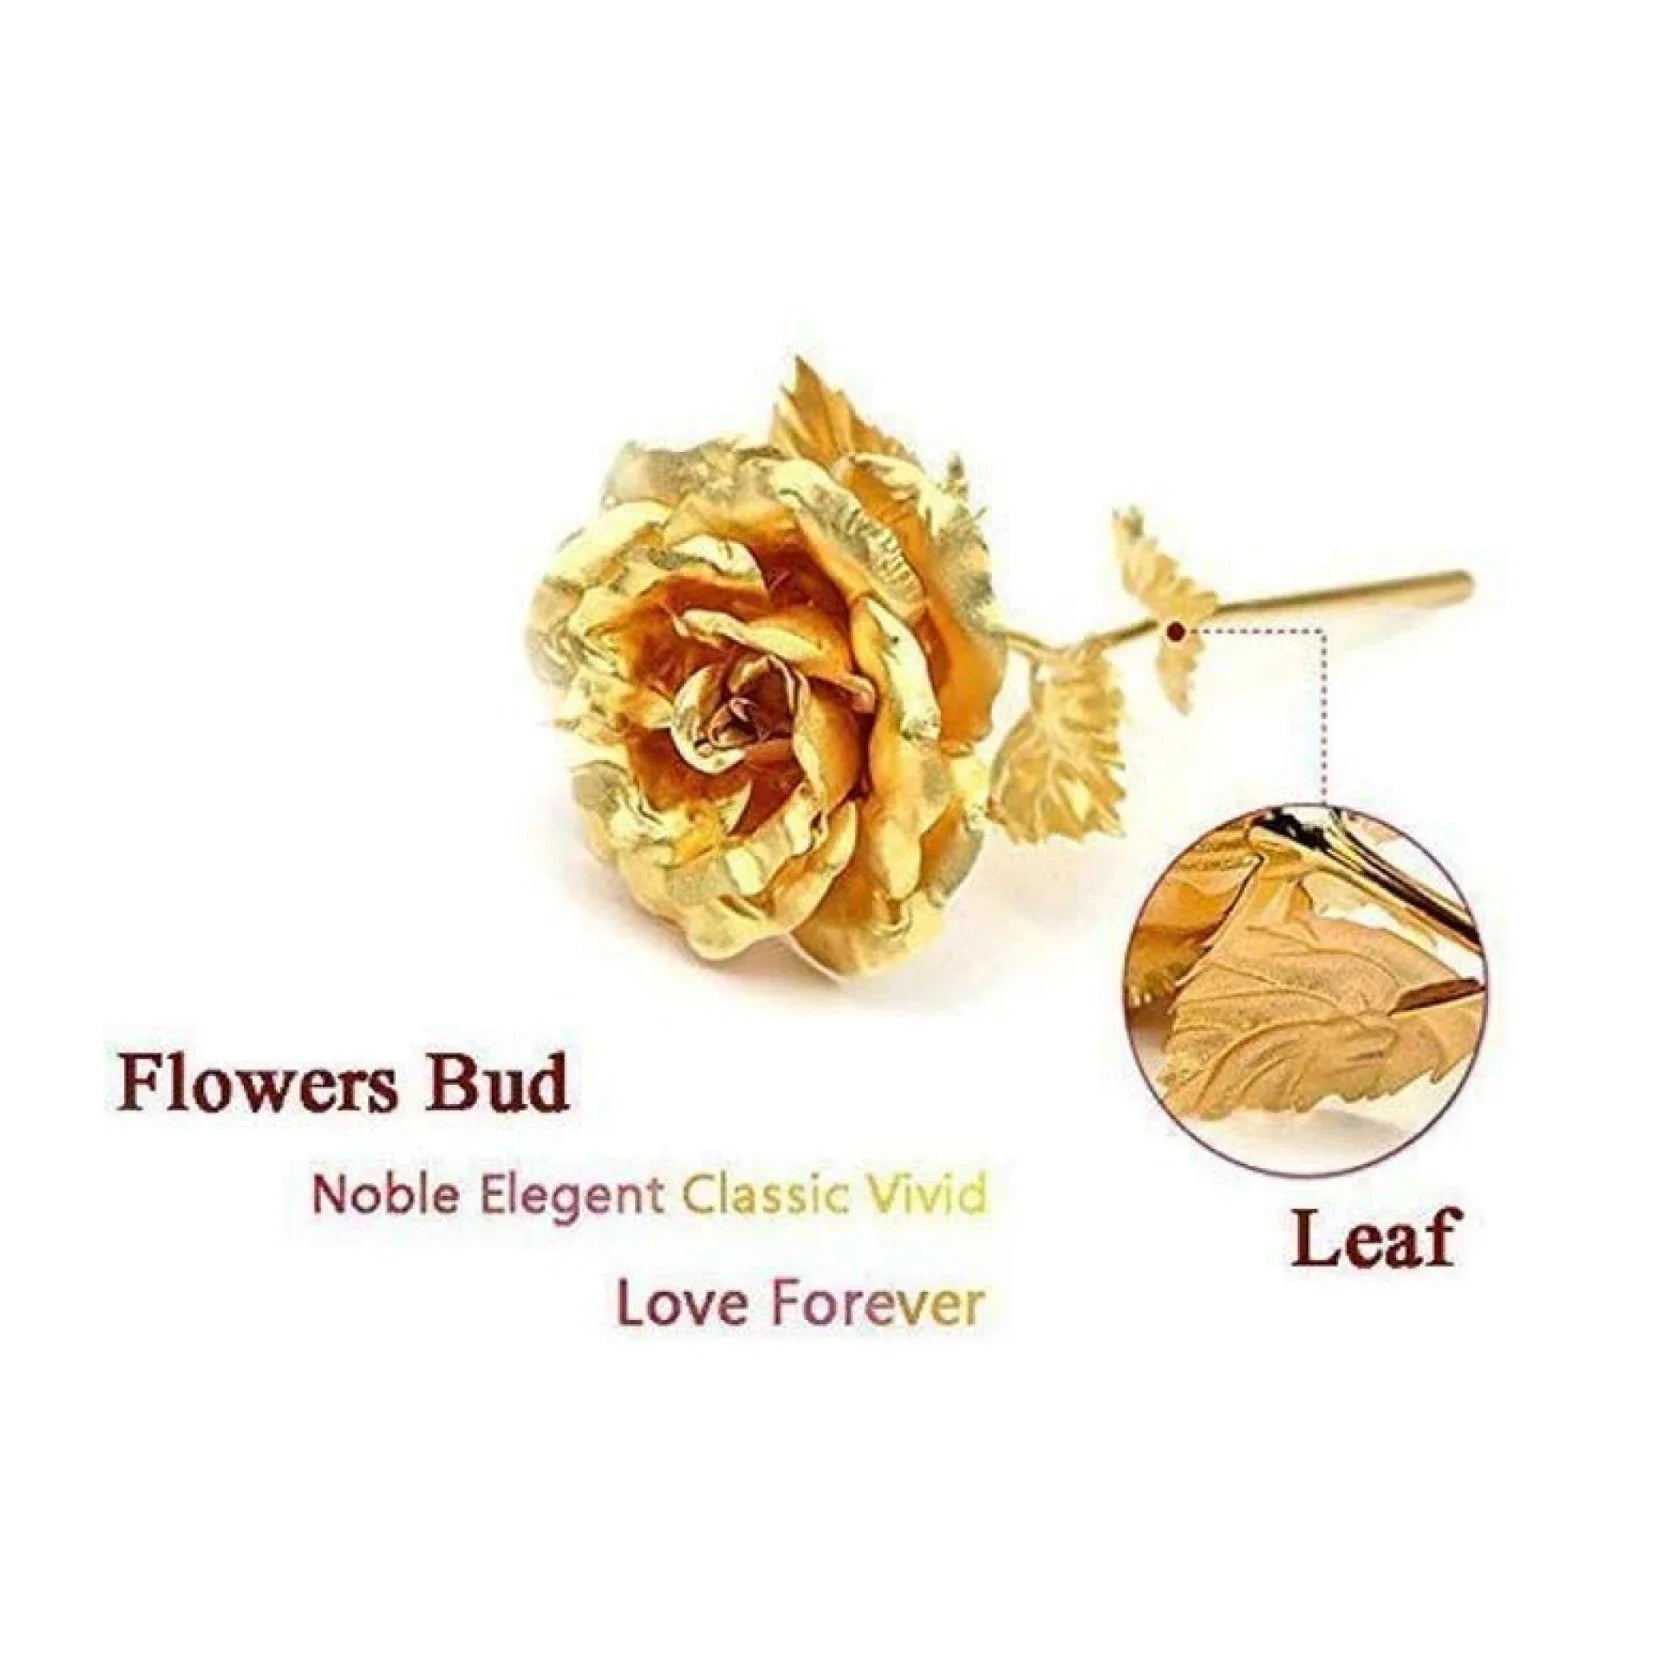 Surprise your valentine with a golden beautiful rose to express the unsaid